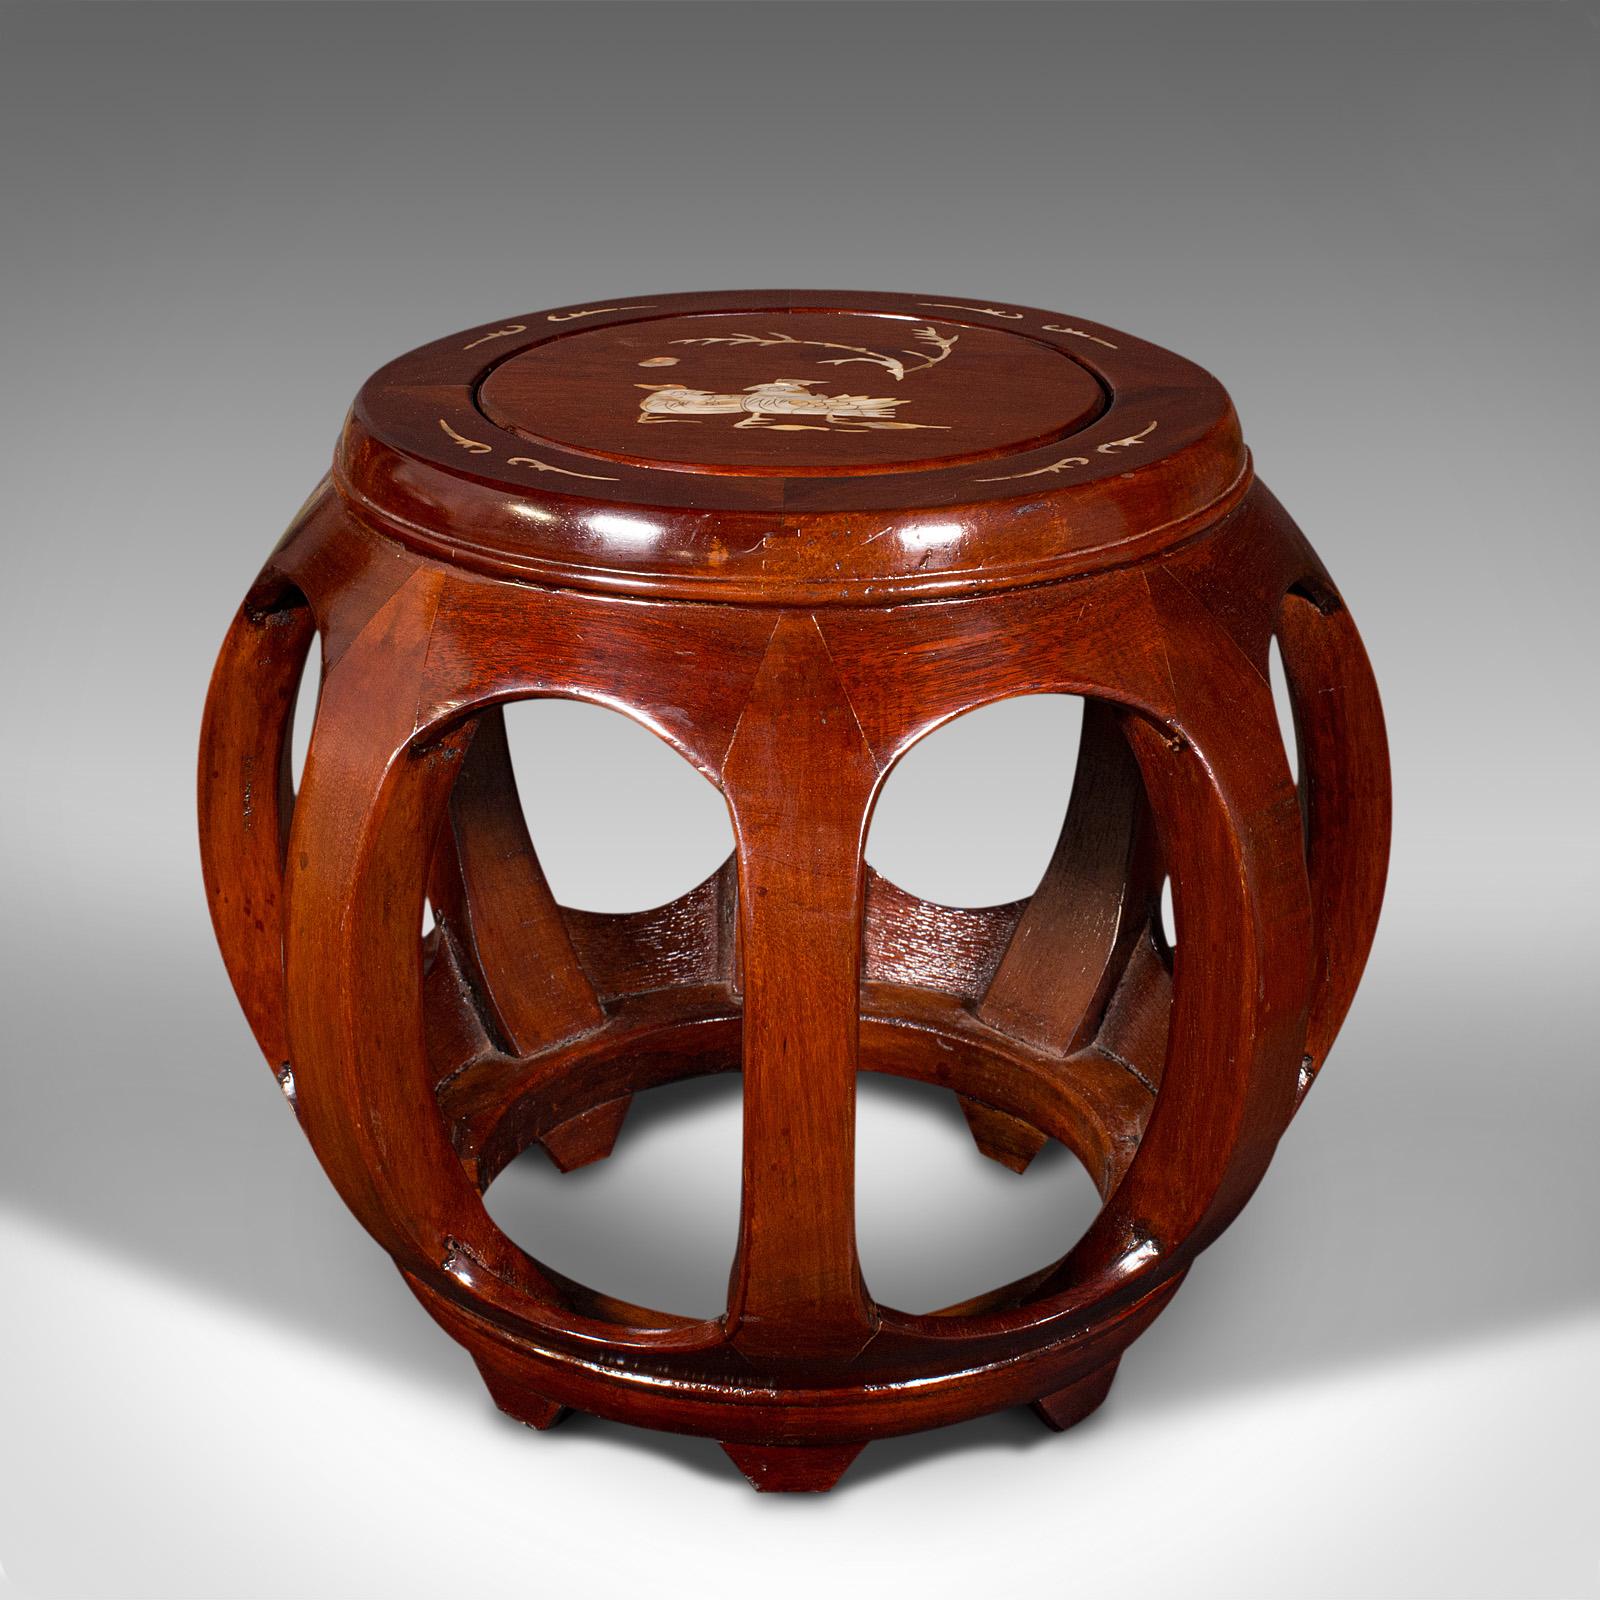 Chinese Export Pair Of Vintage Barrel Stools, Chinese, Inlaid, Decorative Display Stand, C.1970 For Sale